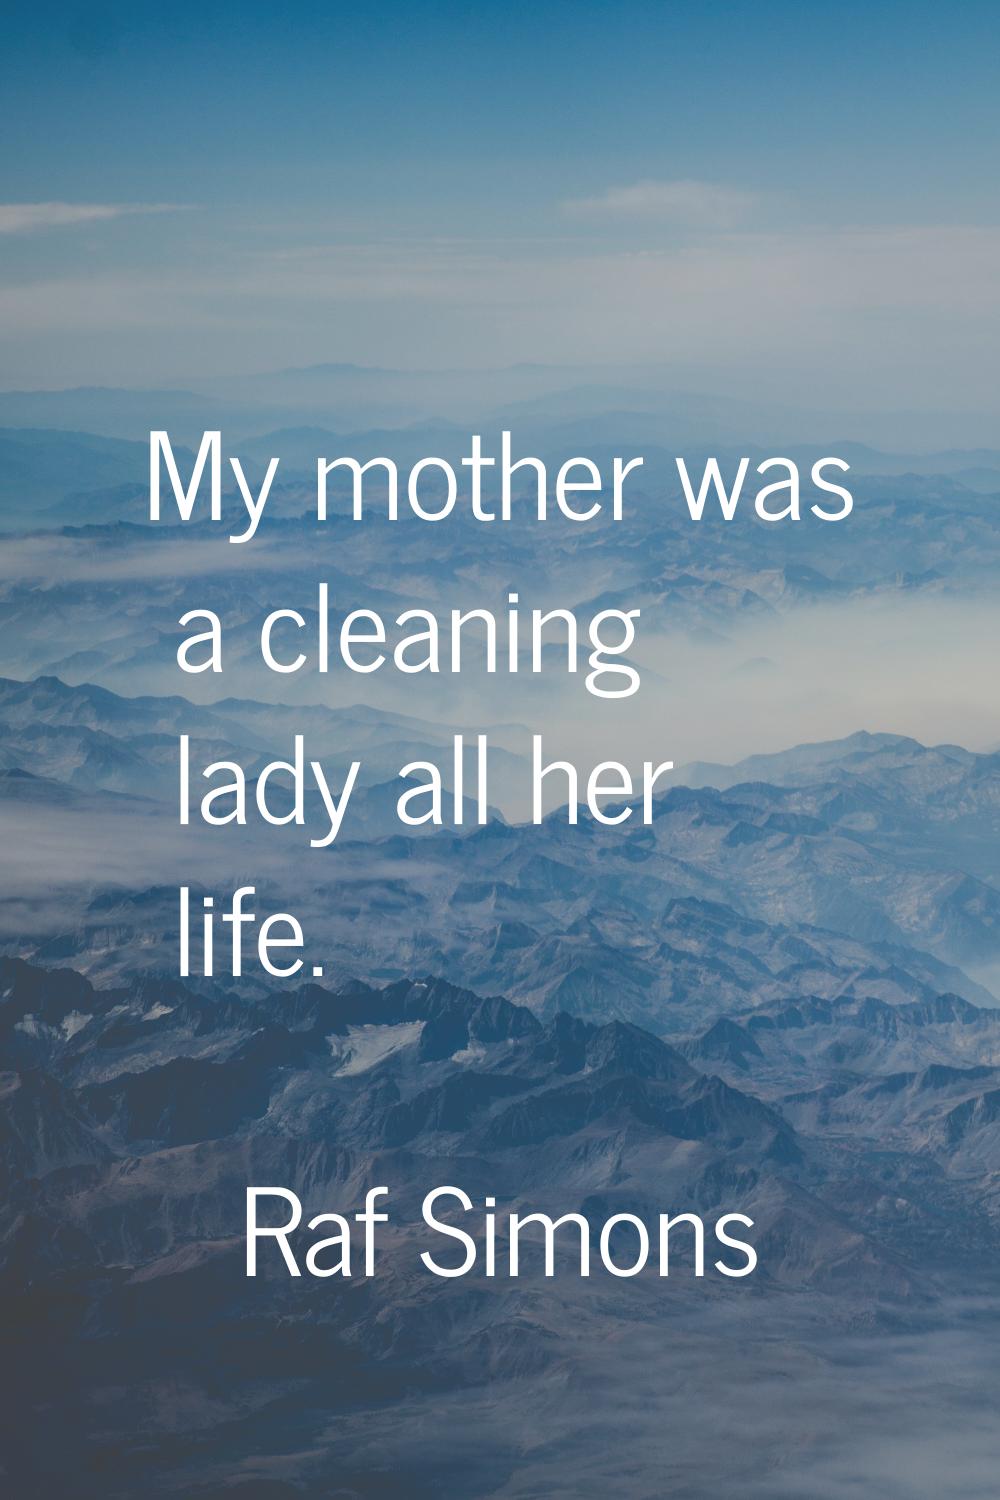 My mother was a cleaning lady all her life.